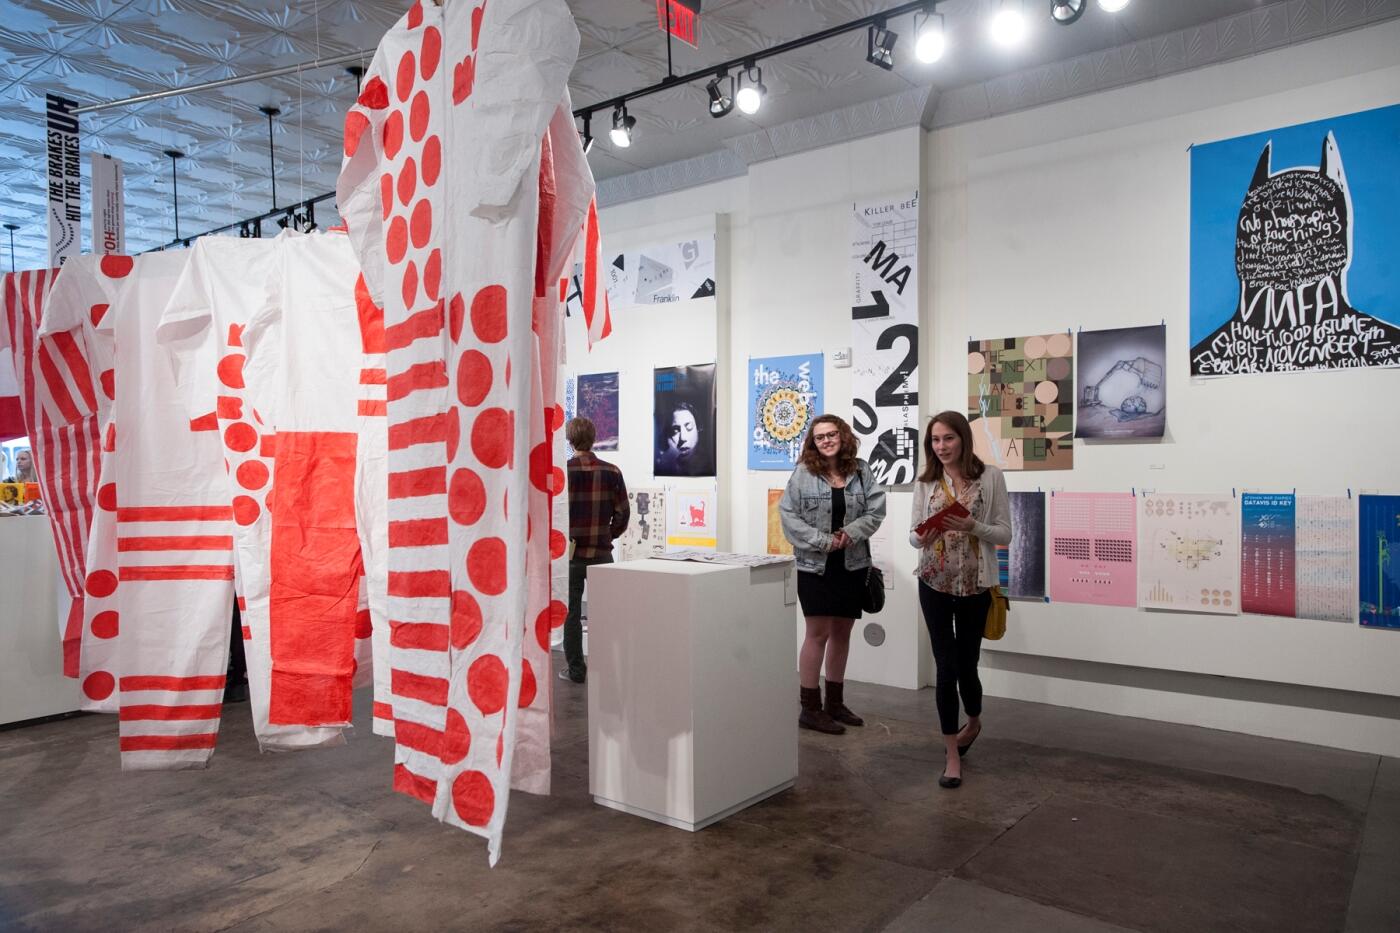 The School of the Arts Juried Design and Fine Arts Exhibition featured works by undergraduate students in all fine art departments. The exhibitions were on view at the Anderson Gallery and the Depot, a new multidisciplinary arts facility located on Broad Street.